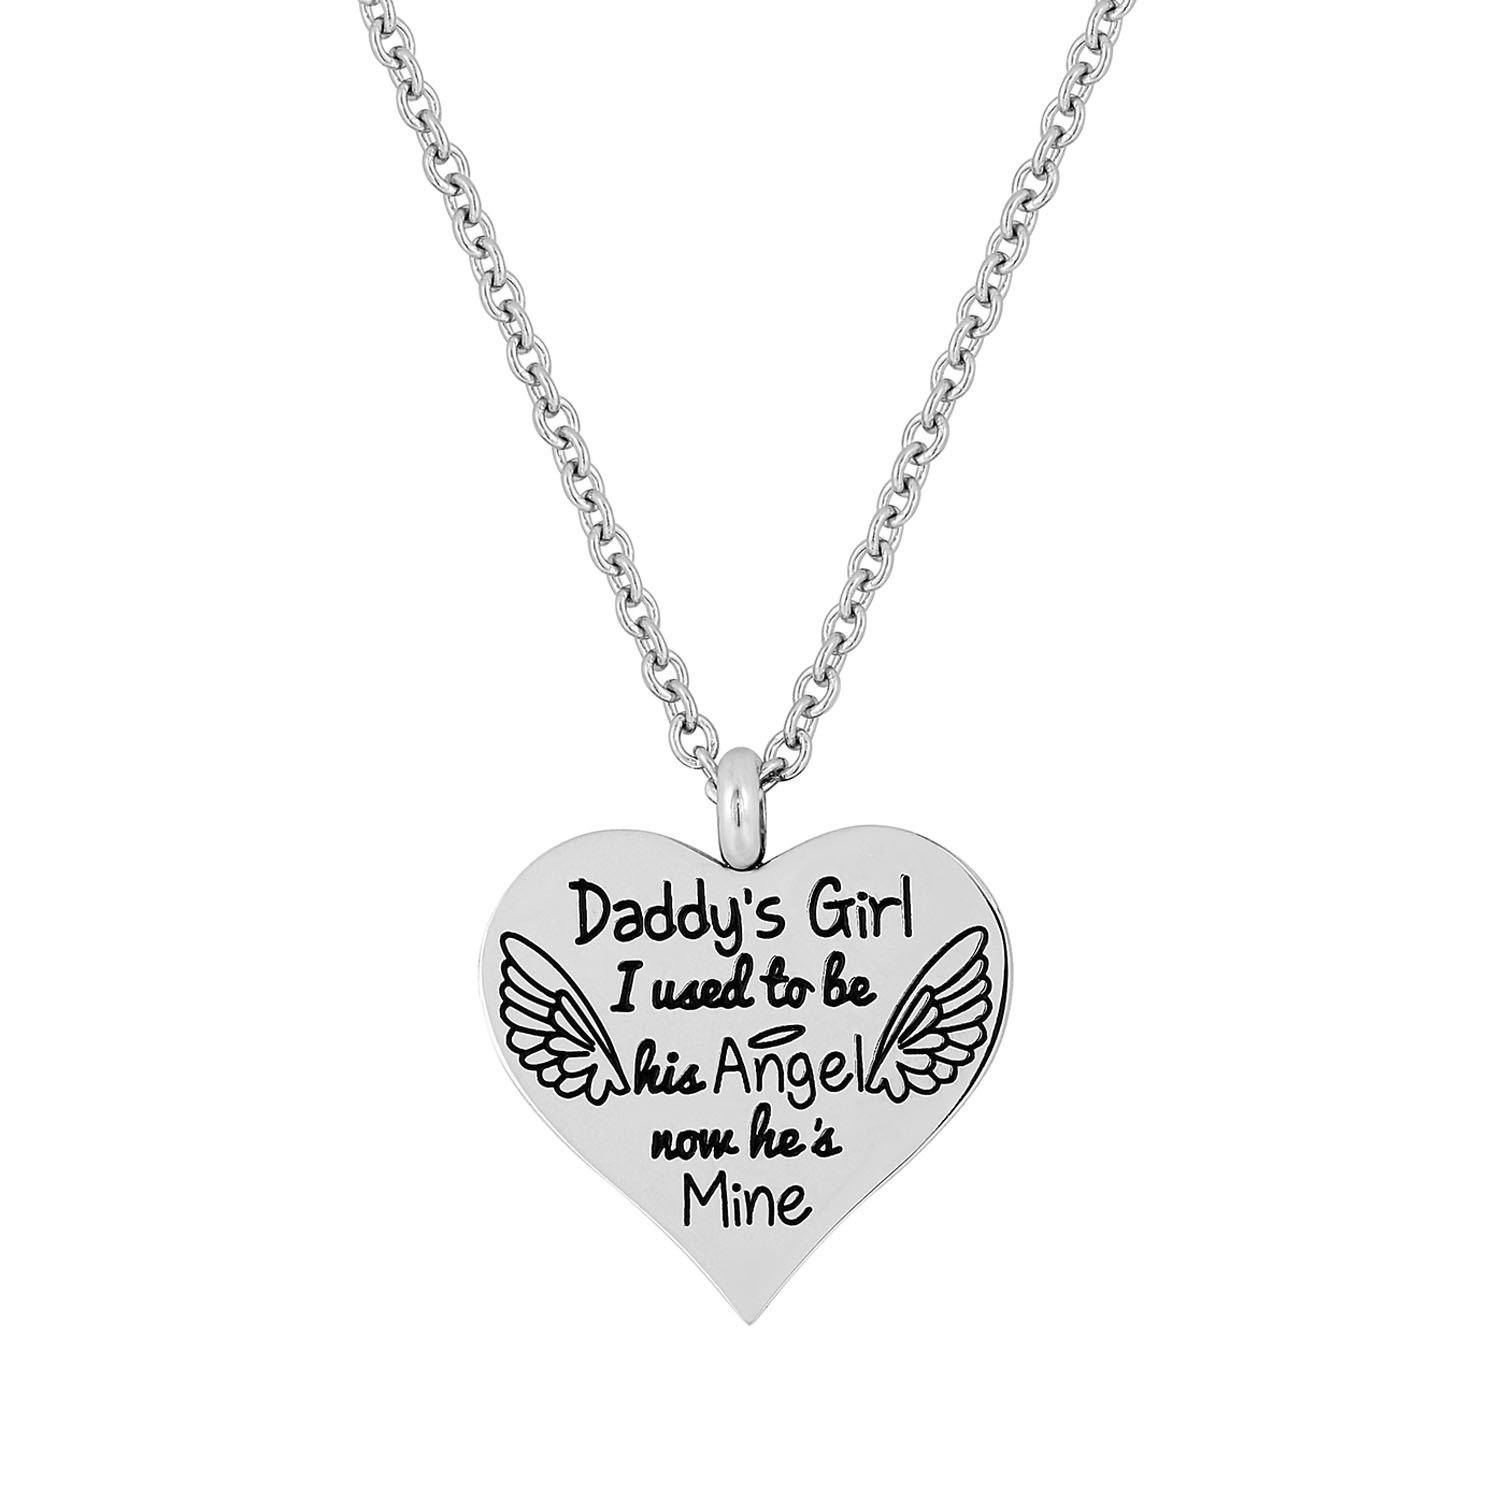 Daddy's Girl Stainless Steel Necklace Jewelry Pendant